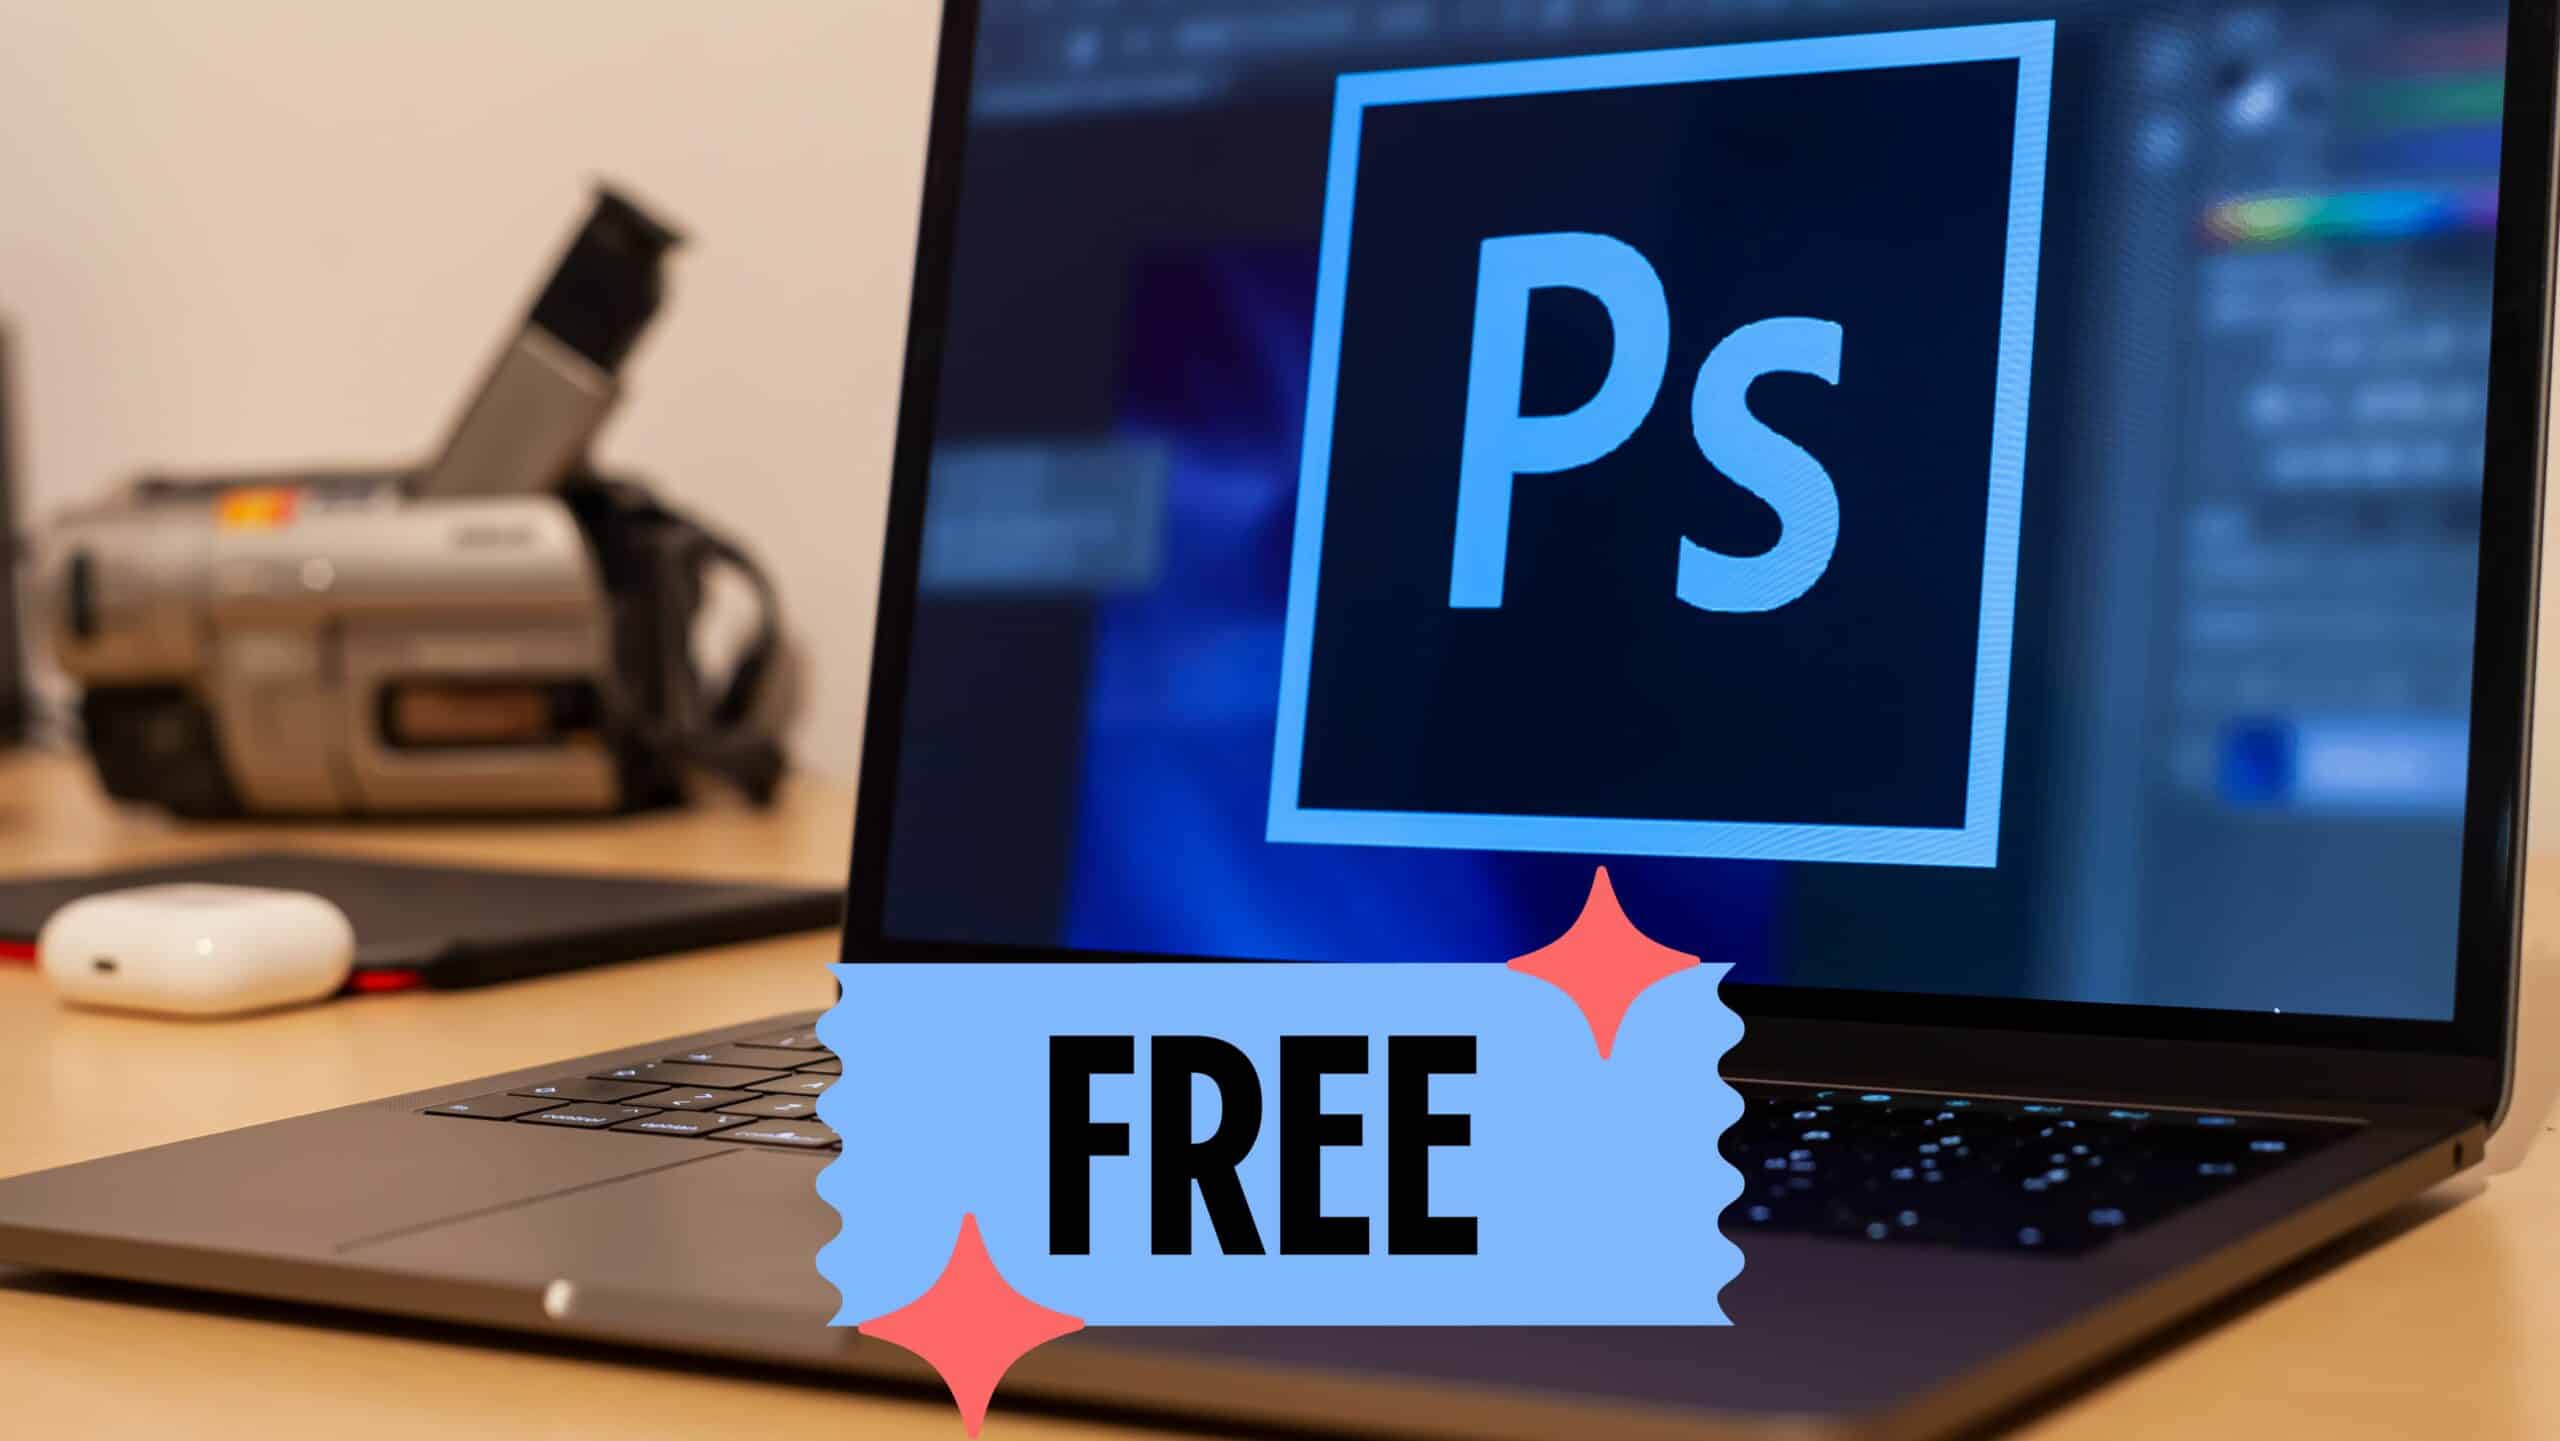 How Can I Get Photoshop Free?